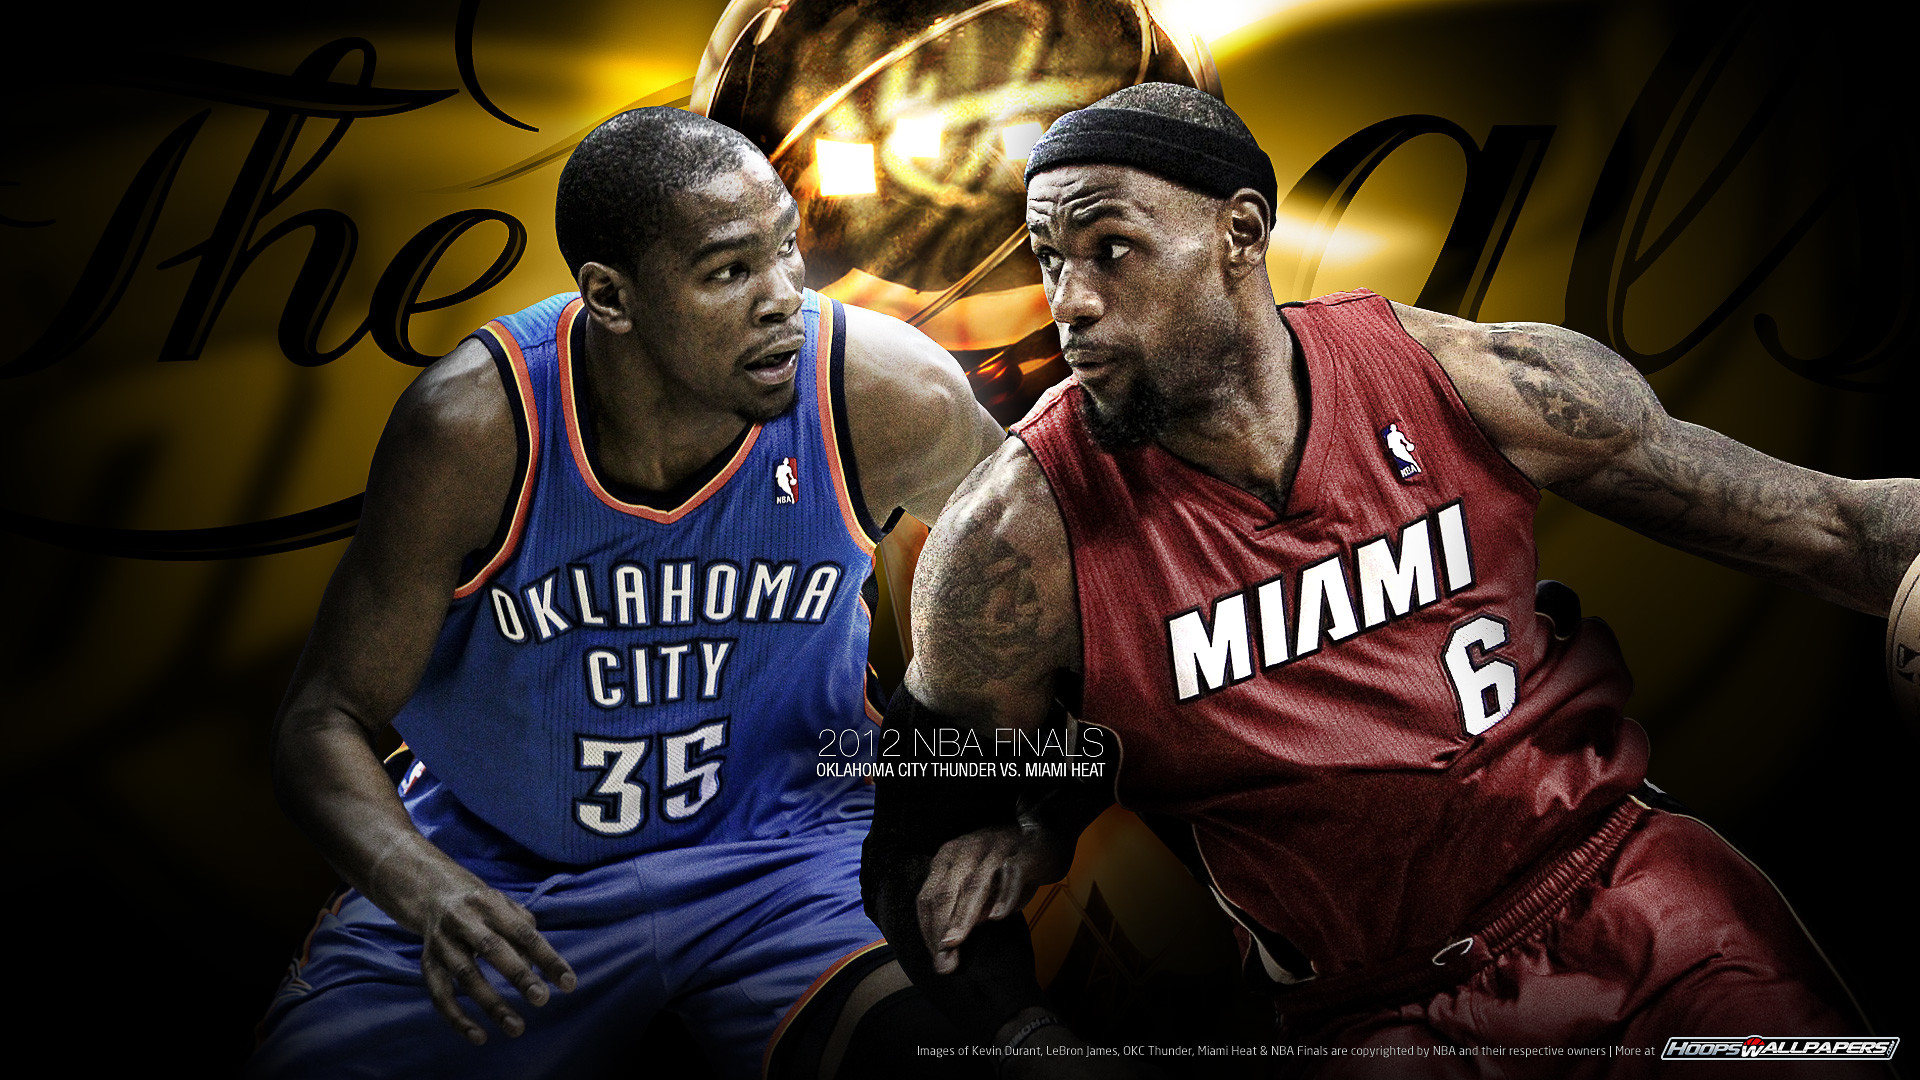 1920x1080 Wallpapers Of NBA Players